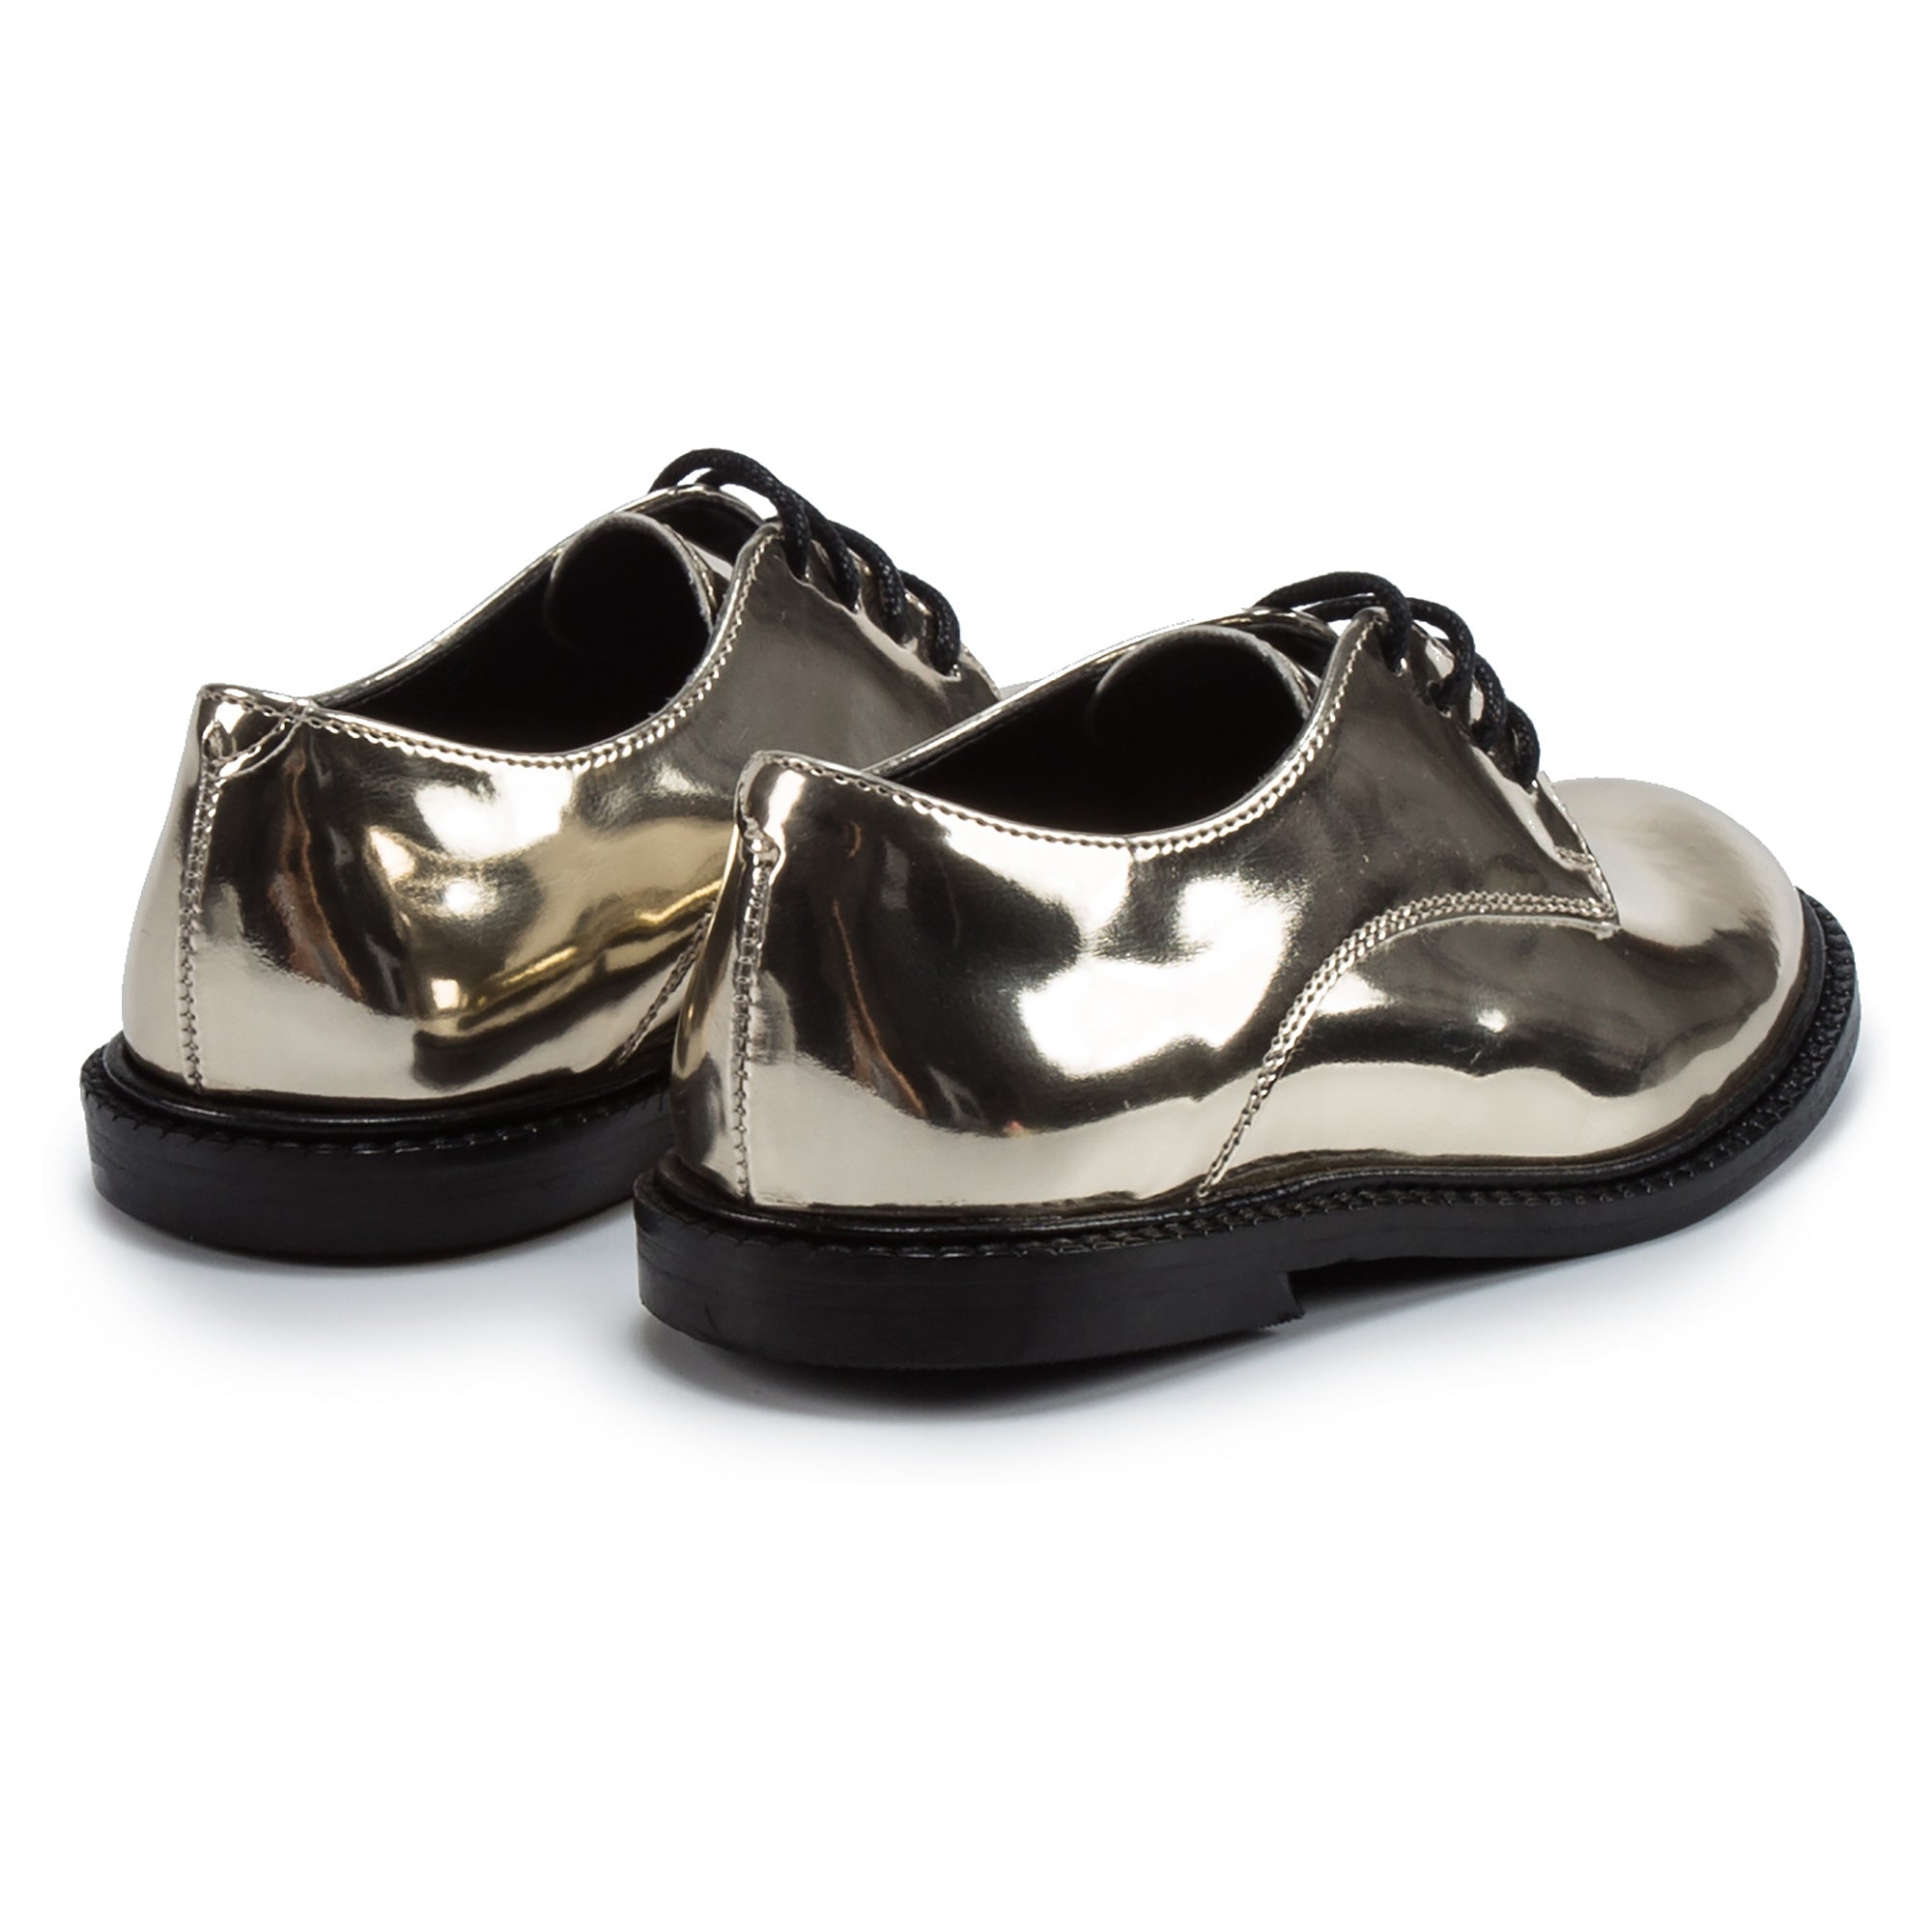 Girls Golden Ieather Shoes